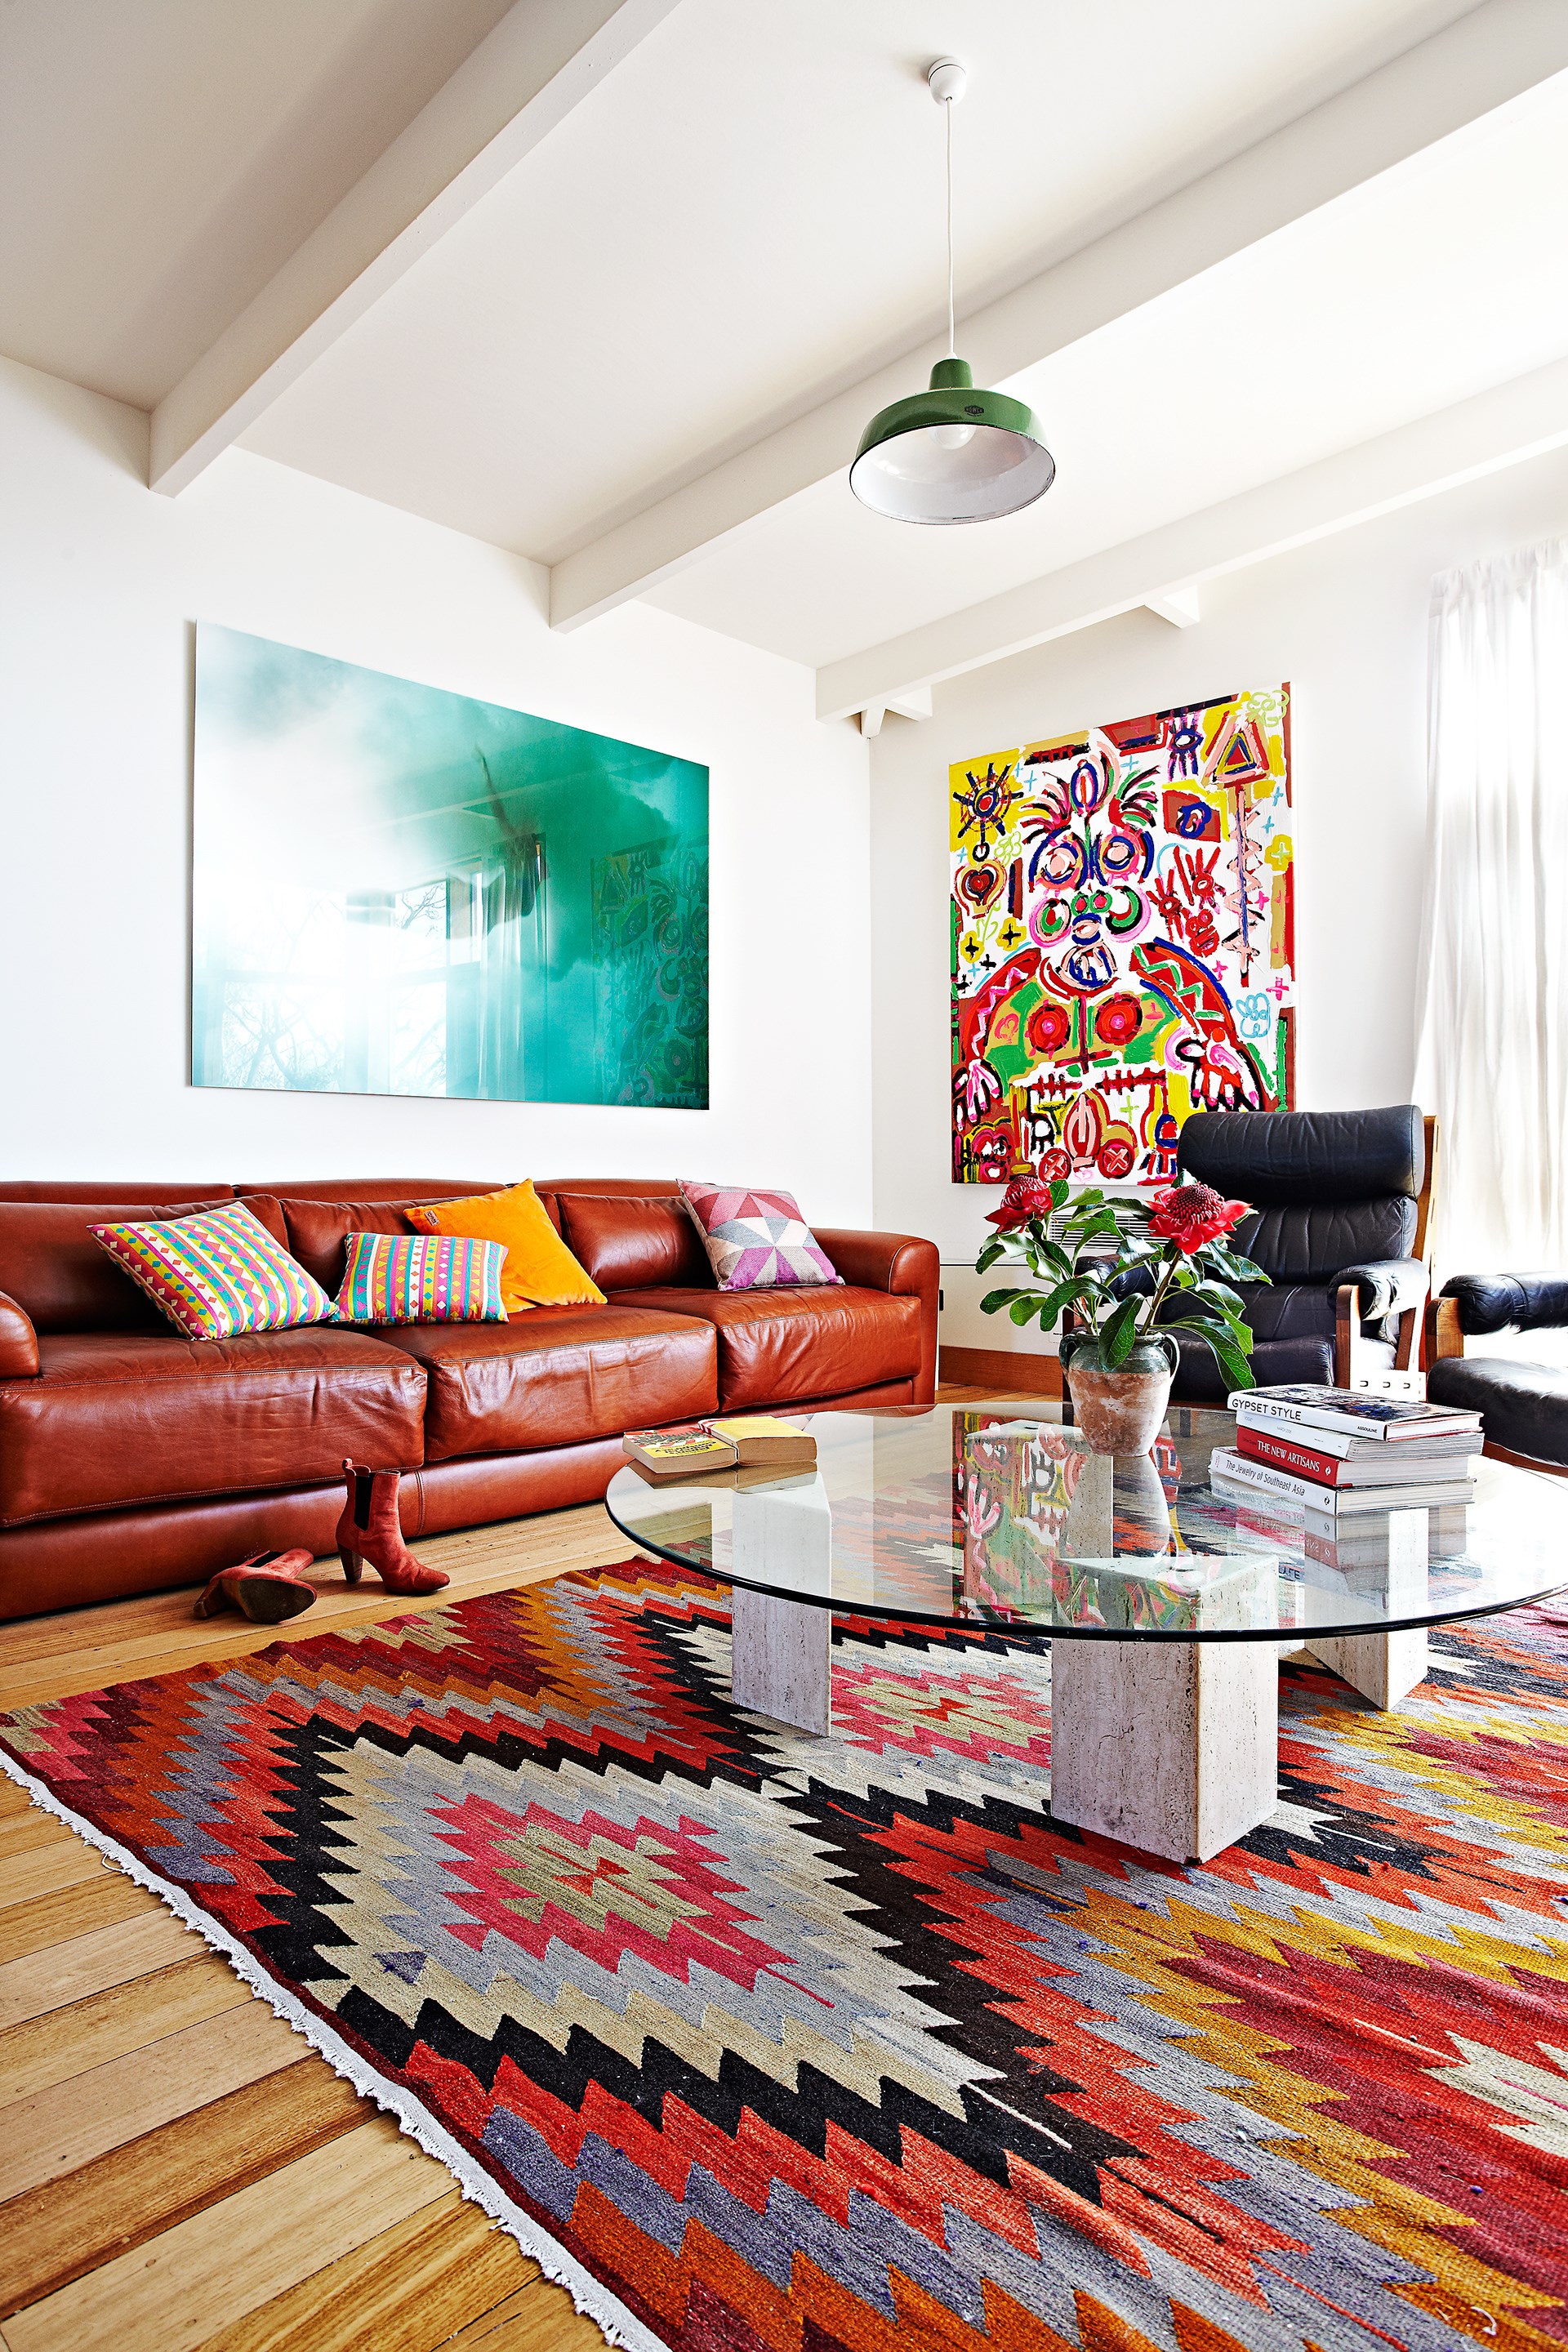 Mixing And Matching Furniture Styles For An Eclectic Home